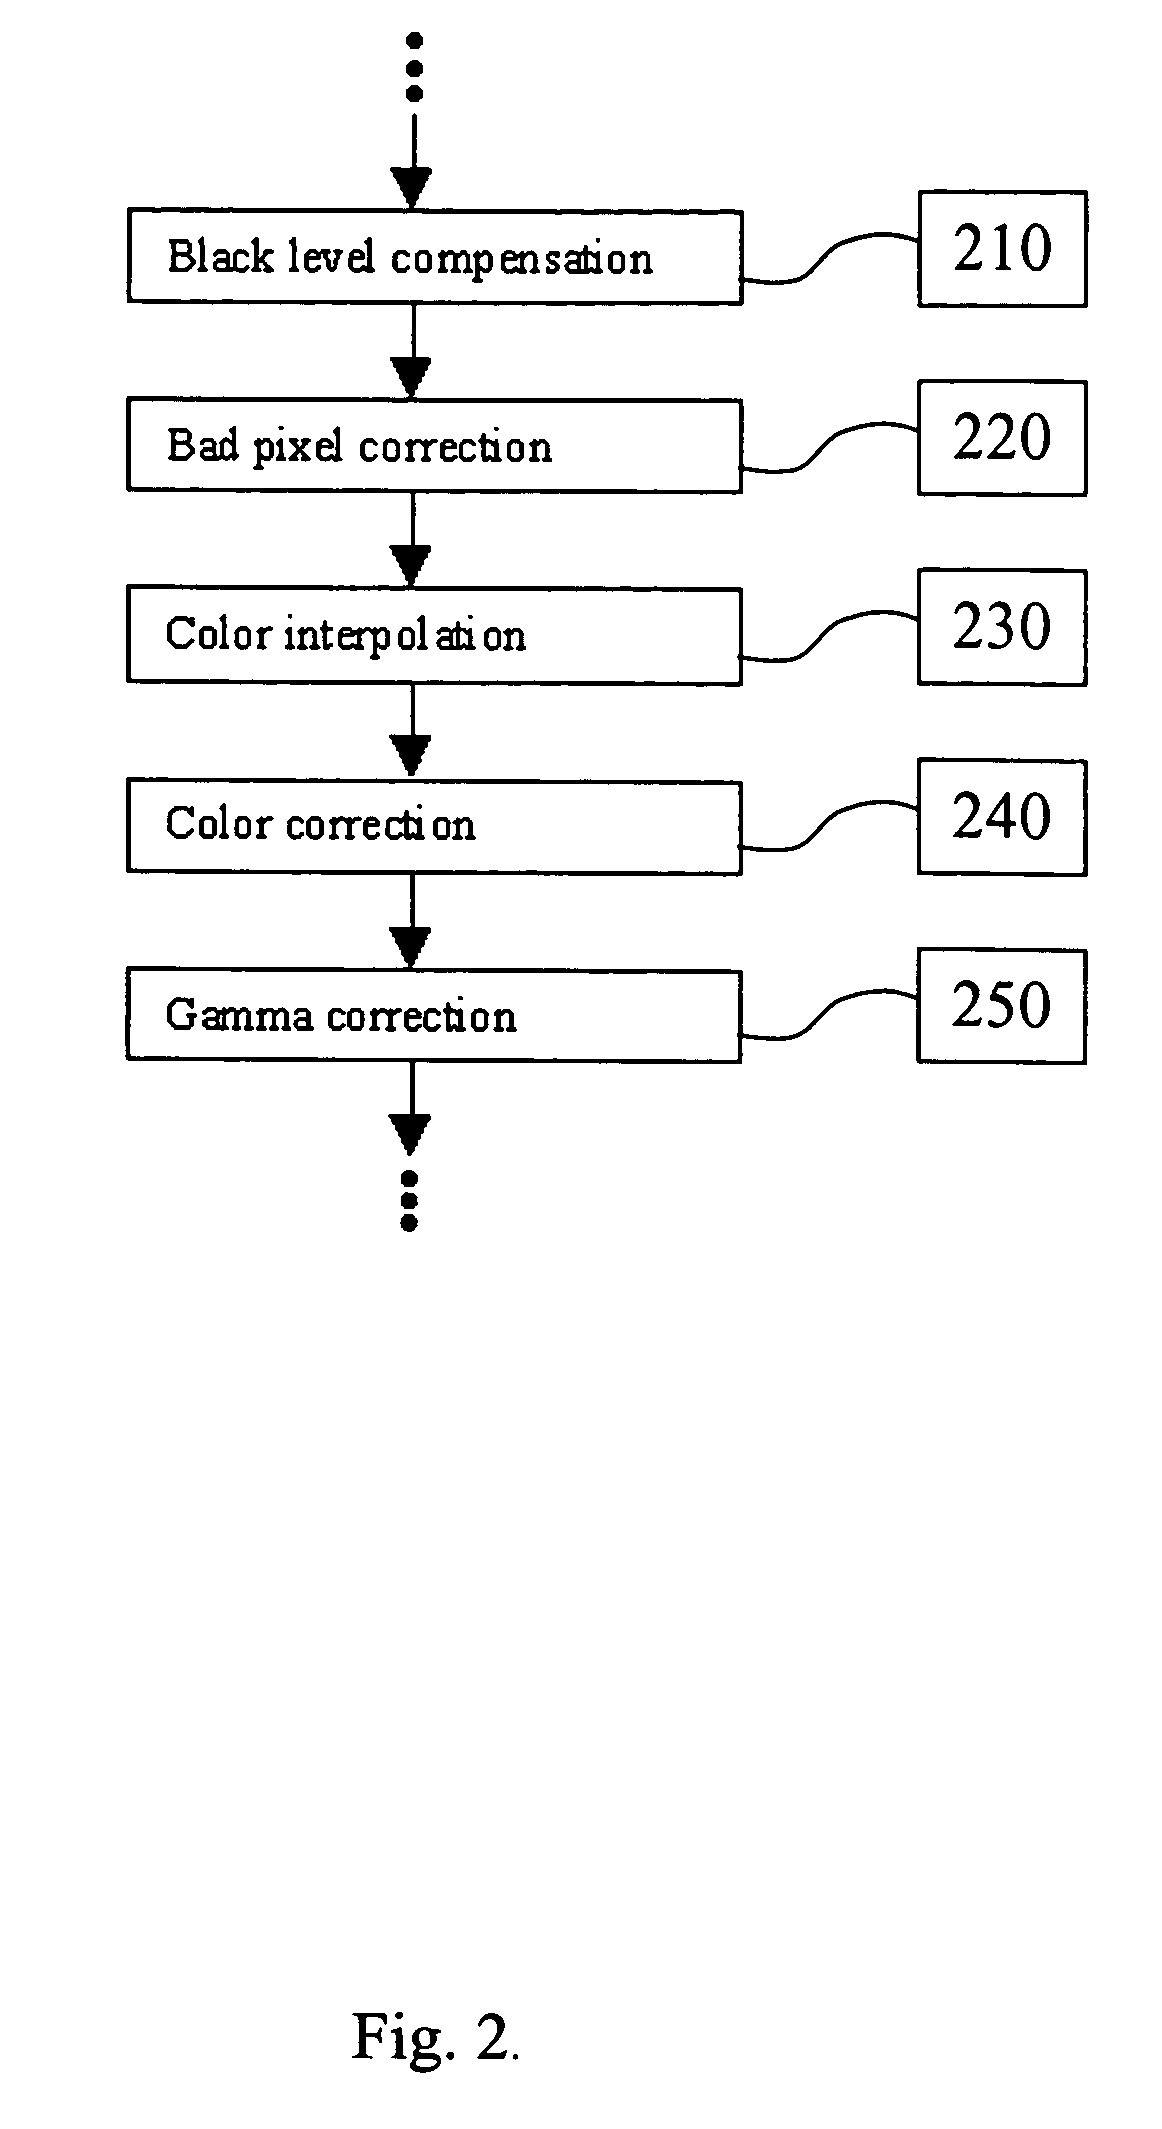 Charge diffusion crosstalk reduction for image sensors